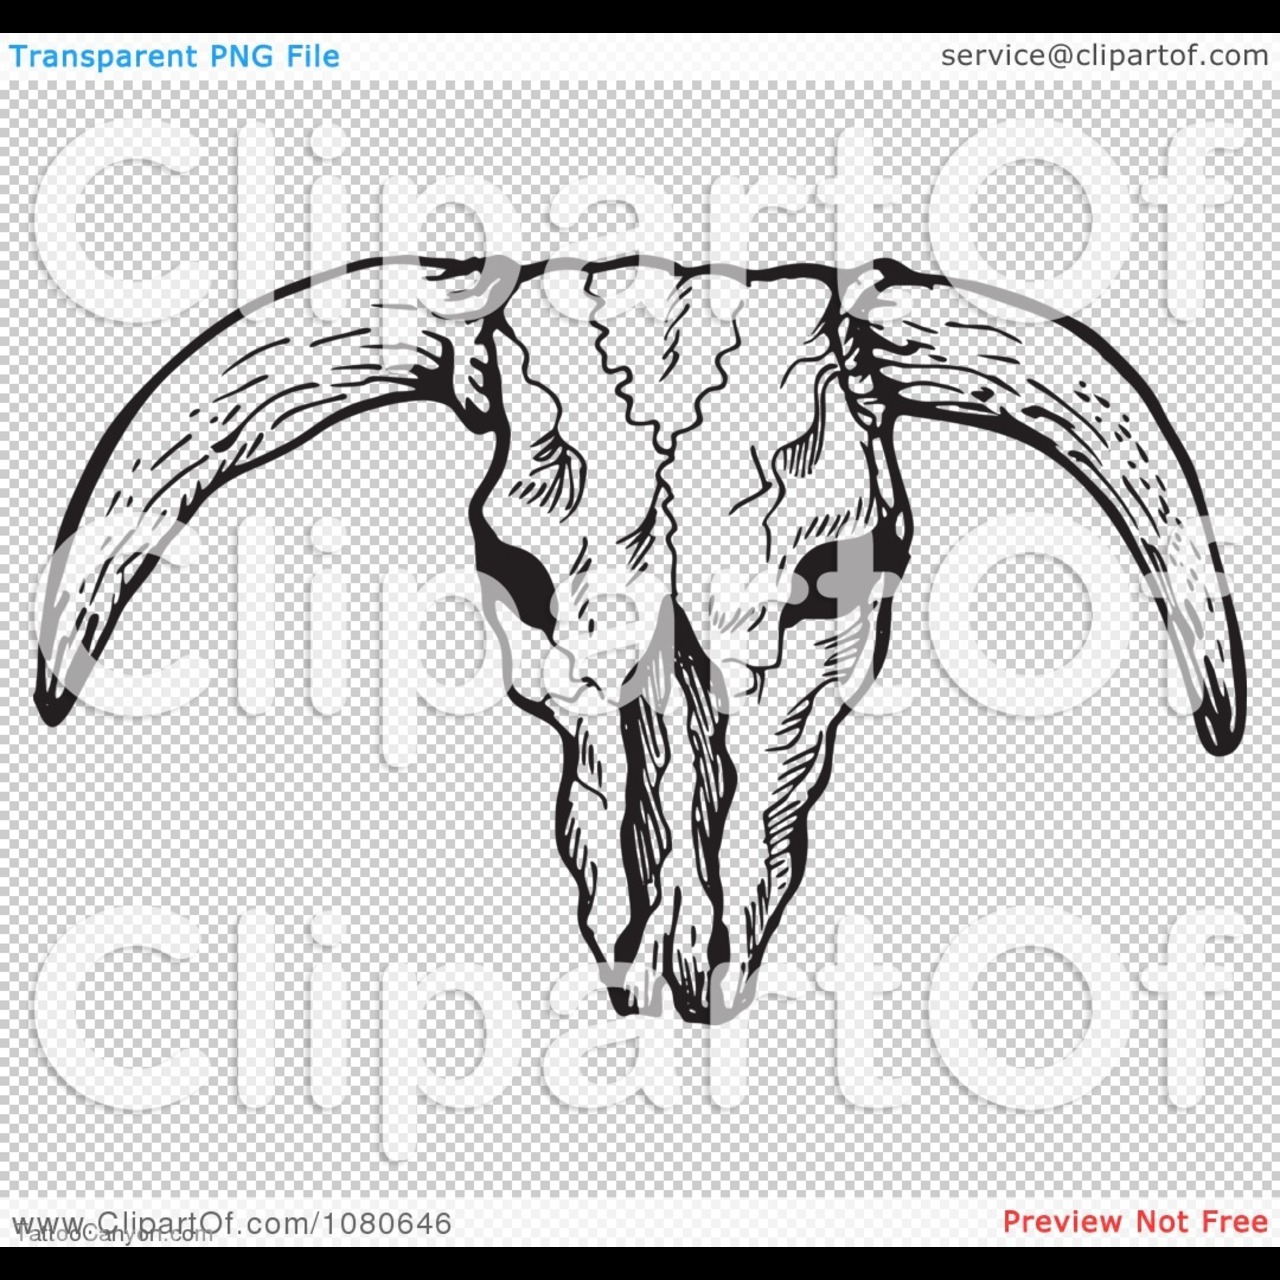 1622 Clipart Black And White Bull Skull With Horns Royalty Free Vector    